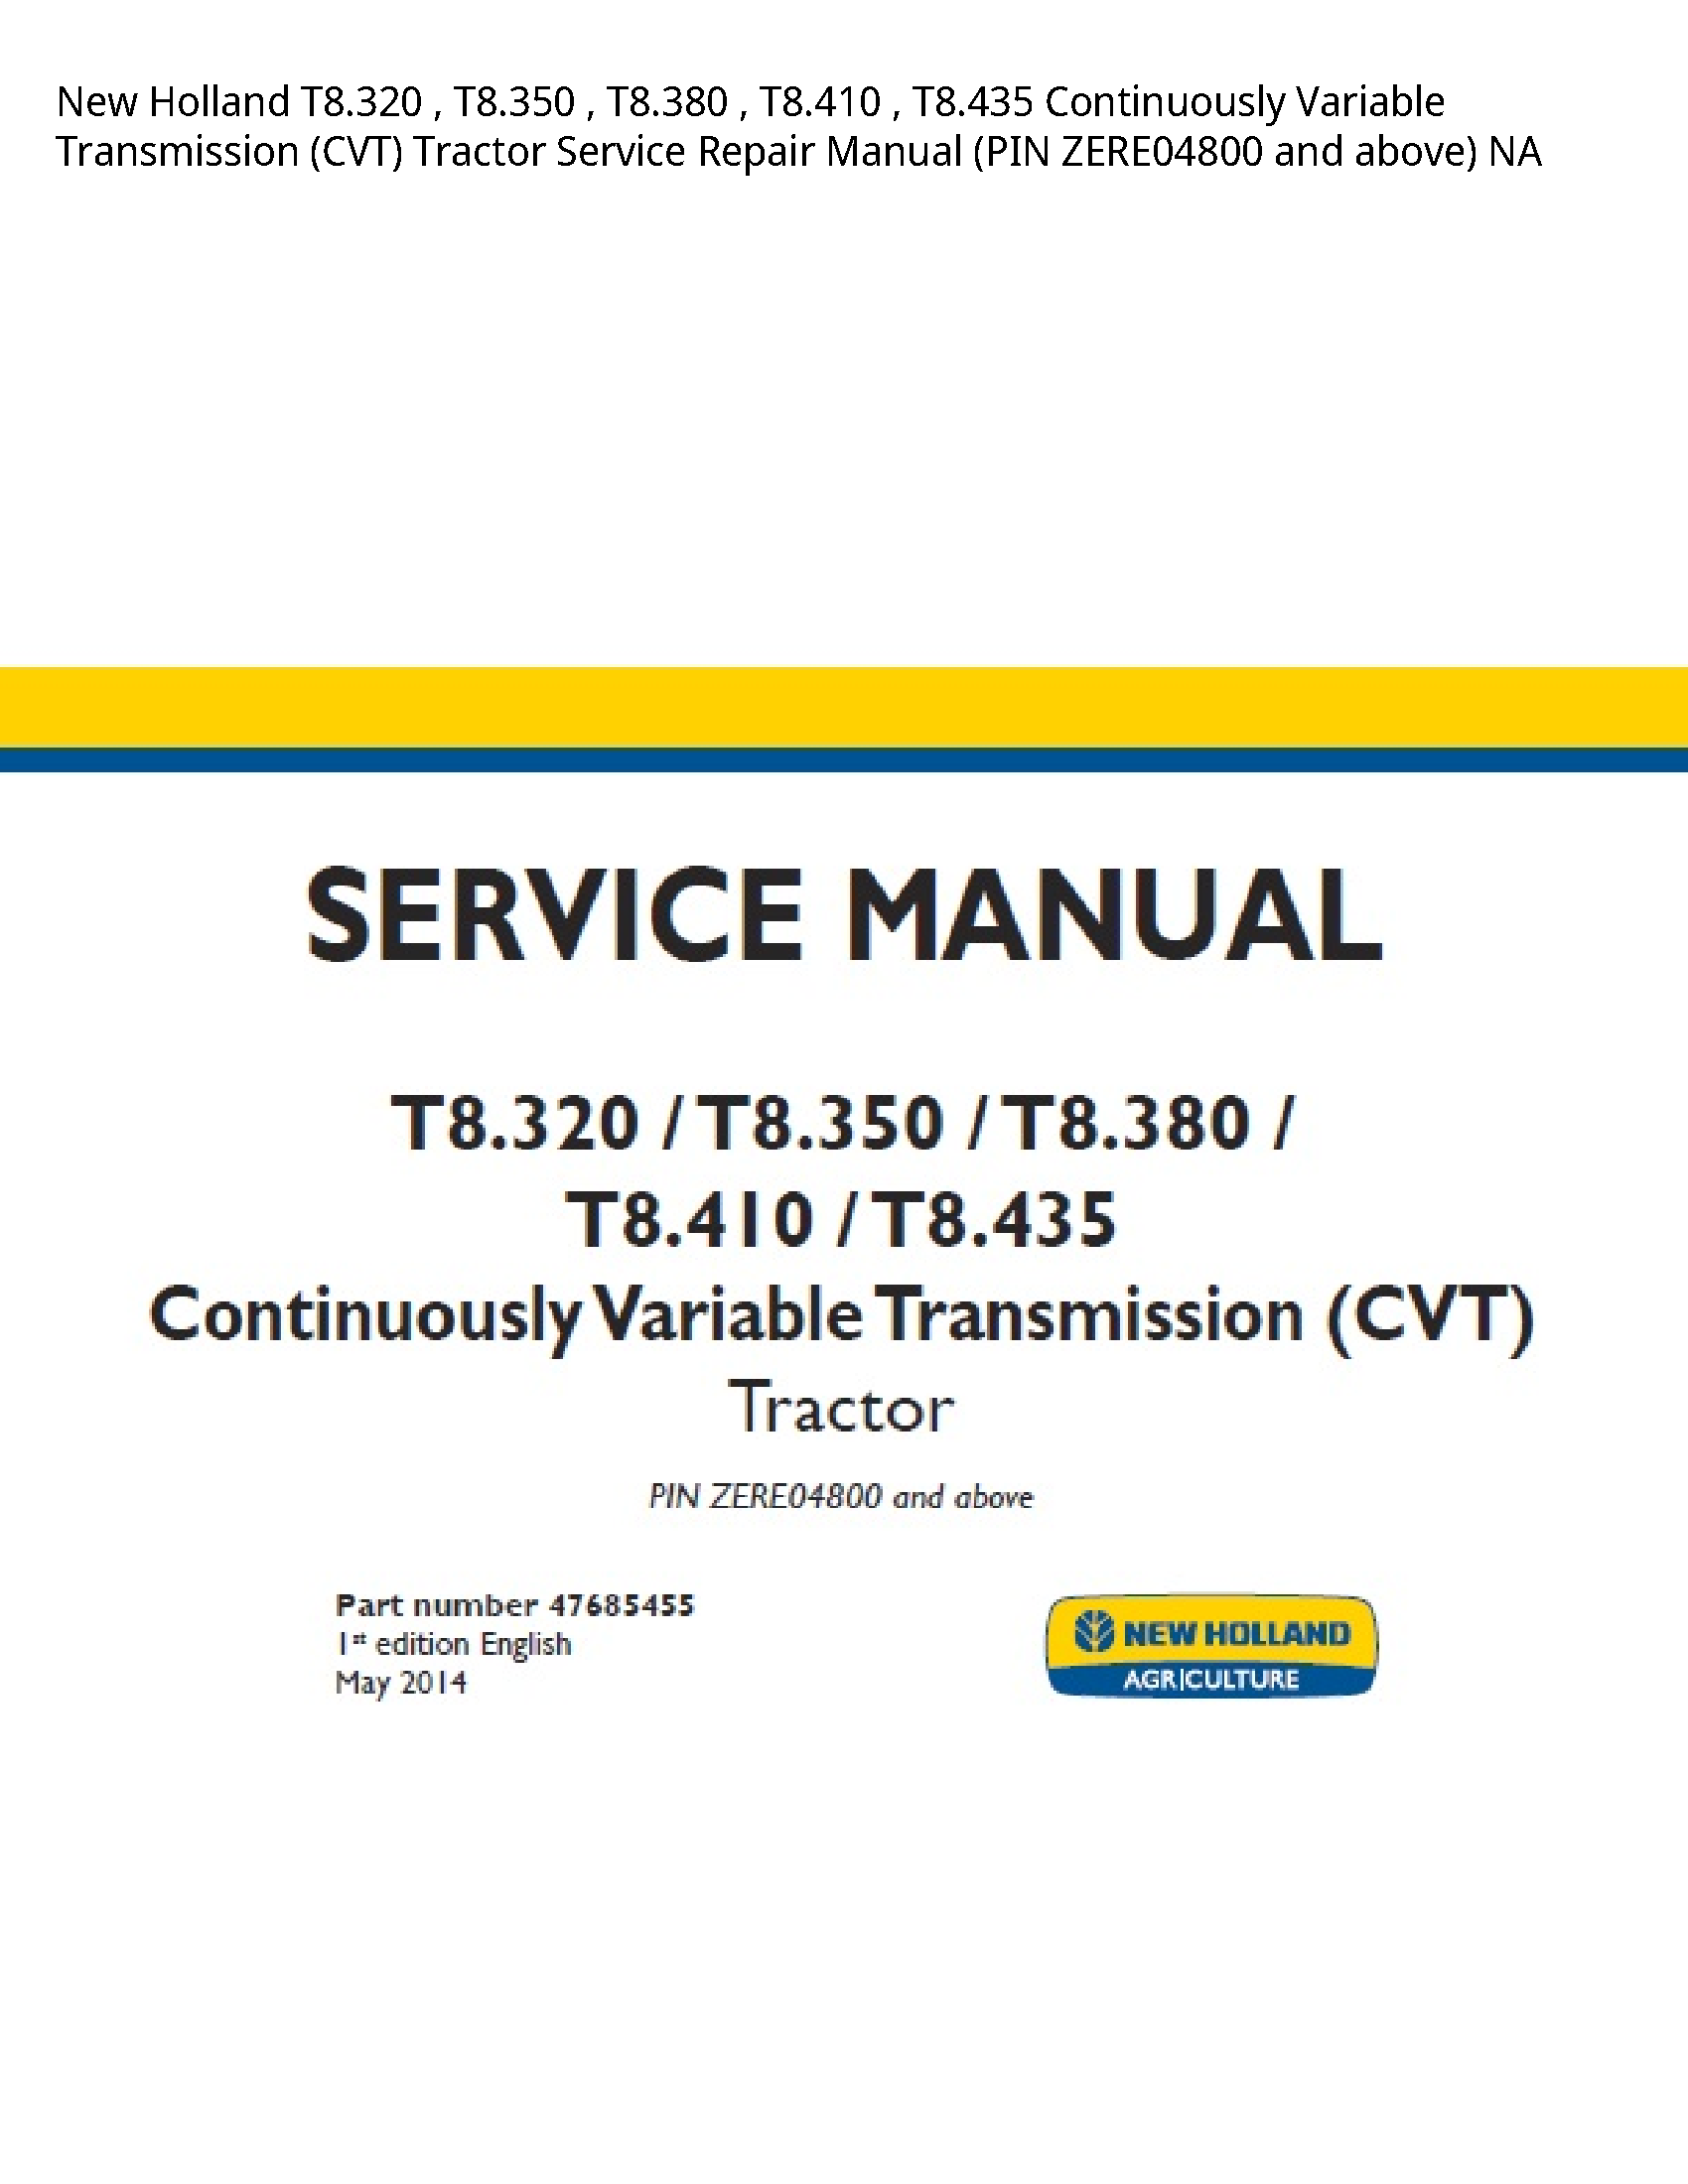 New Holland T8.320 Continuously Variable Transmission (CVT) Tractor manual